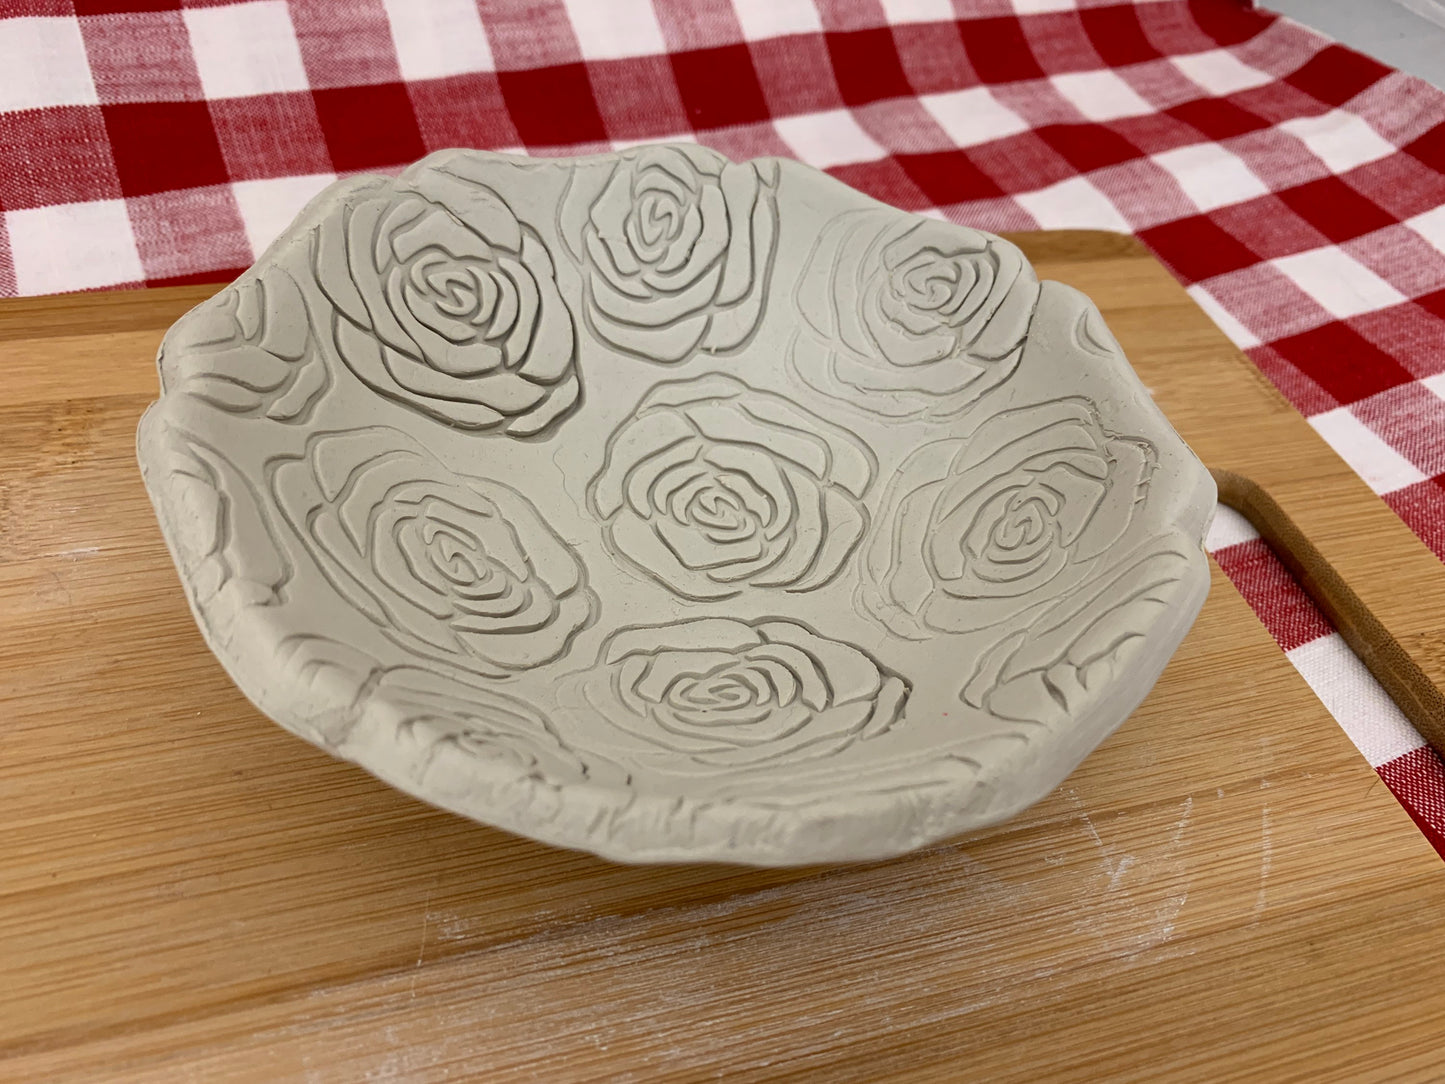 Rose Design, Pottery Stamp or Stencil w/ cutter, multiple sizes